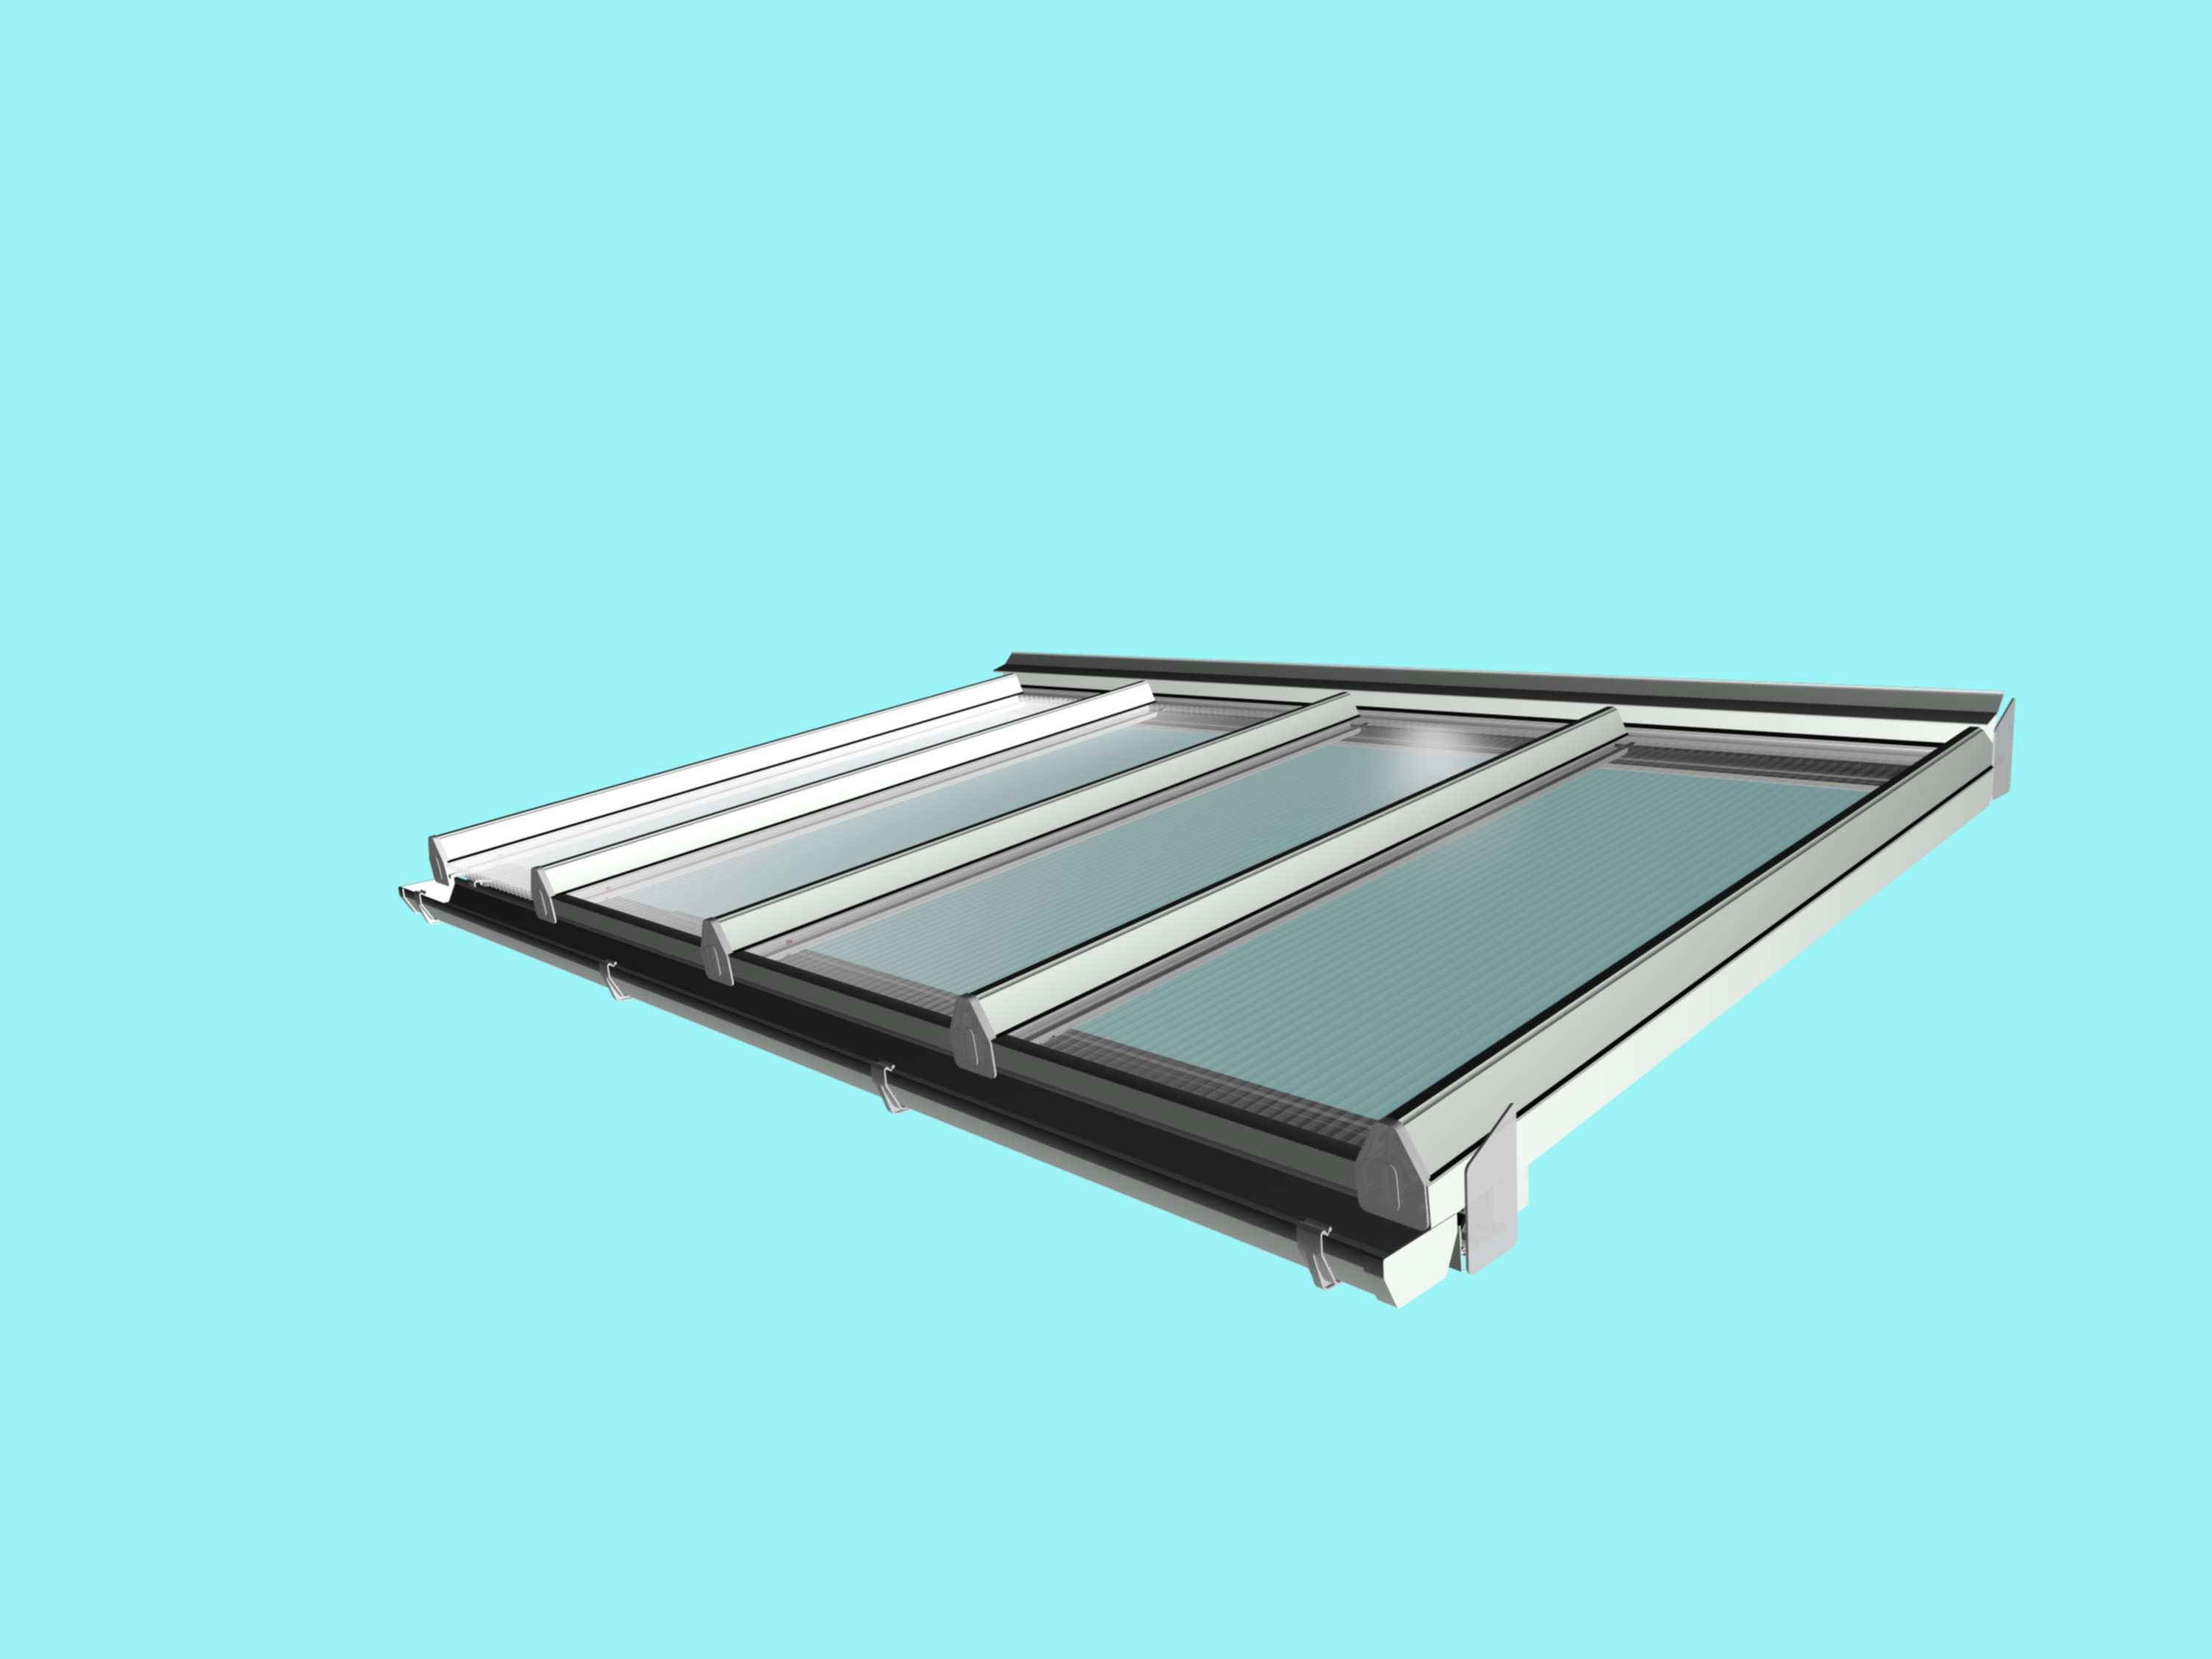 Self-Supporting DIY Conservatory Roof Kit for 25mm polycarbonate, 4.0m wide x 2.5m Projection from Omega Build